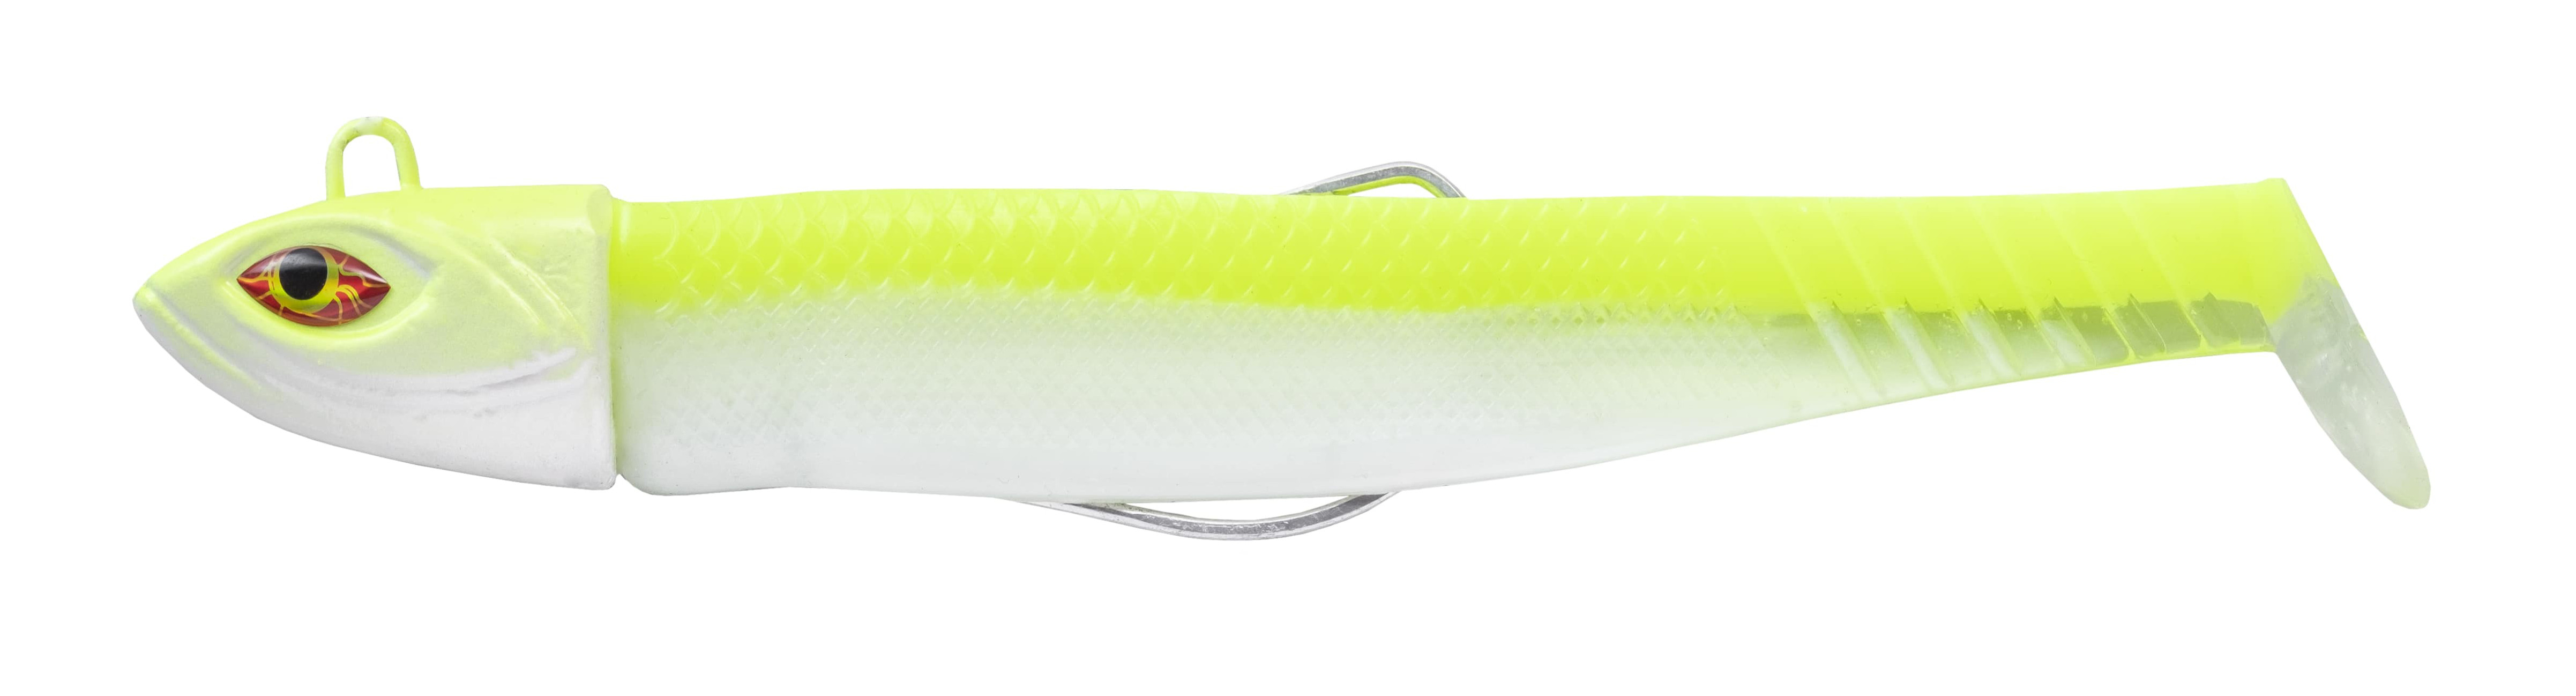 Cinnetic Crafty Candy Shad 10.5cm (25g) (2 Stück) - White Chartreuse